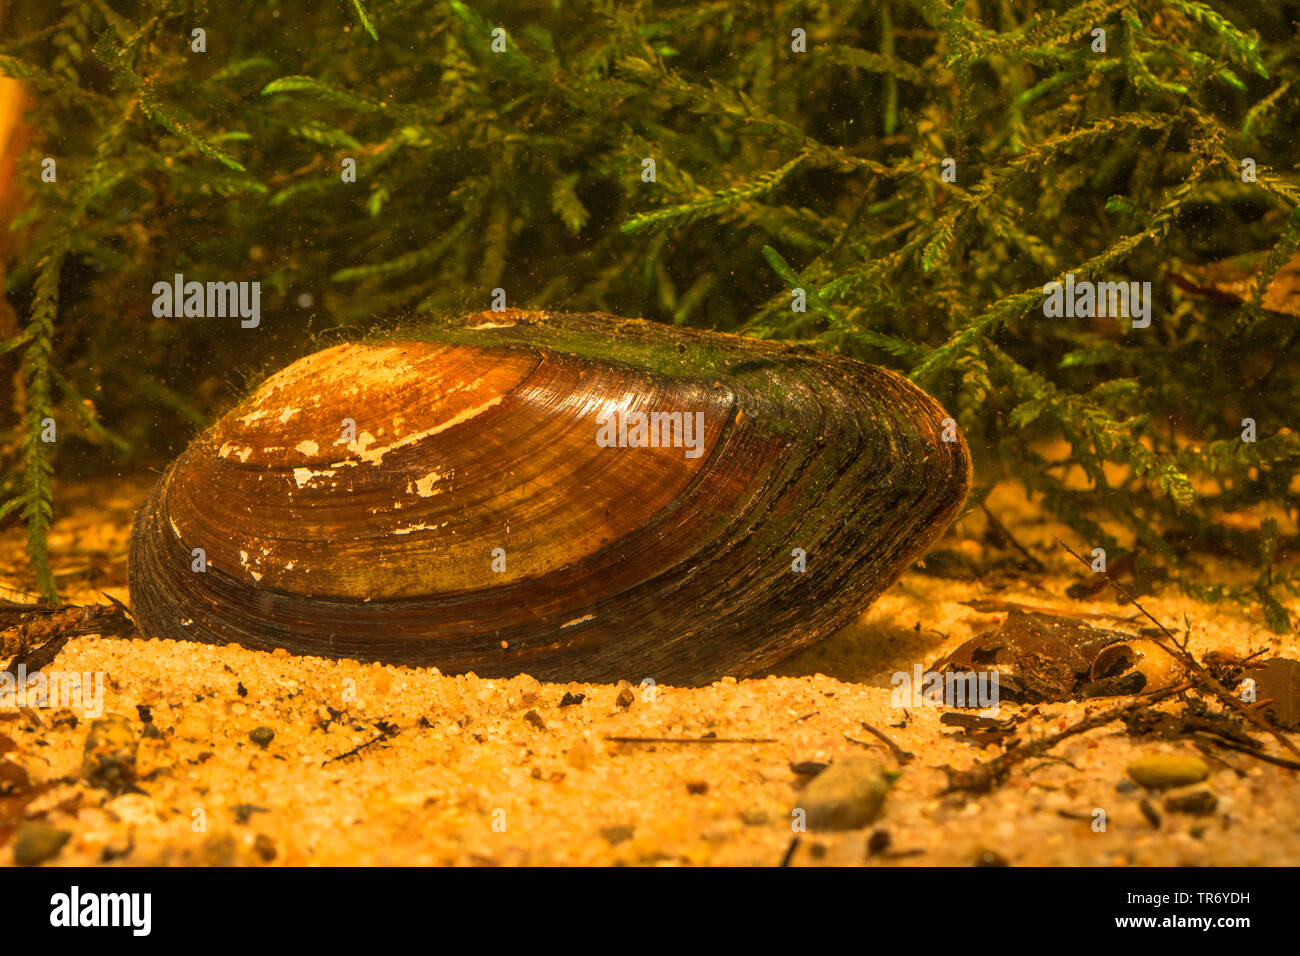 Common pond mussel, duck mussel (Anodonta anatina), on the pond bottom, Germany Stock Photo